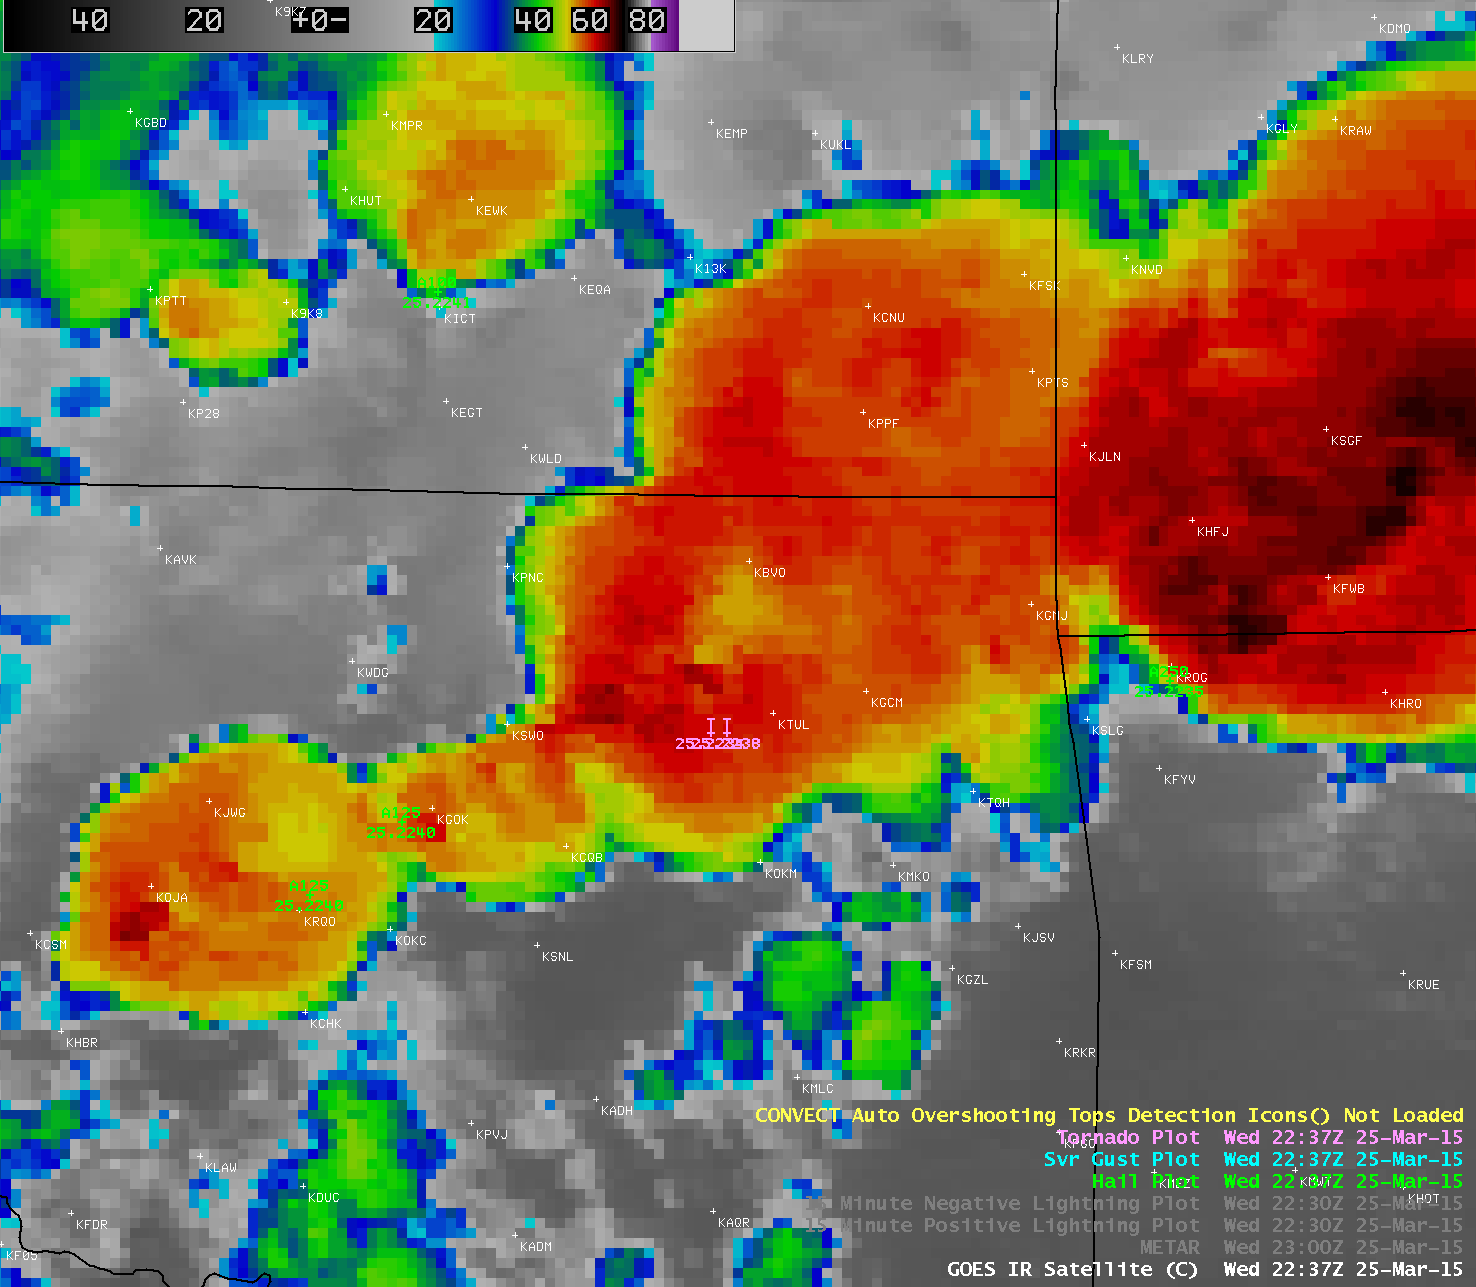 GOES-13 10.7 µm IR channel images (click to play animation)